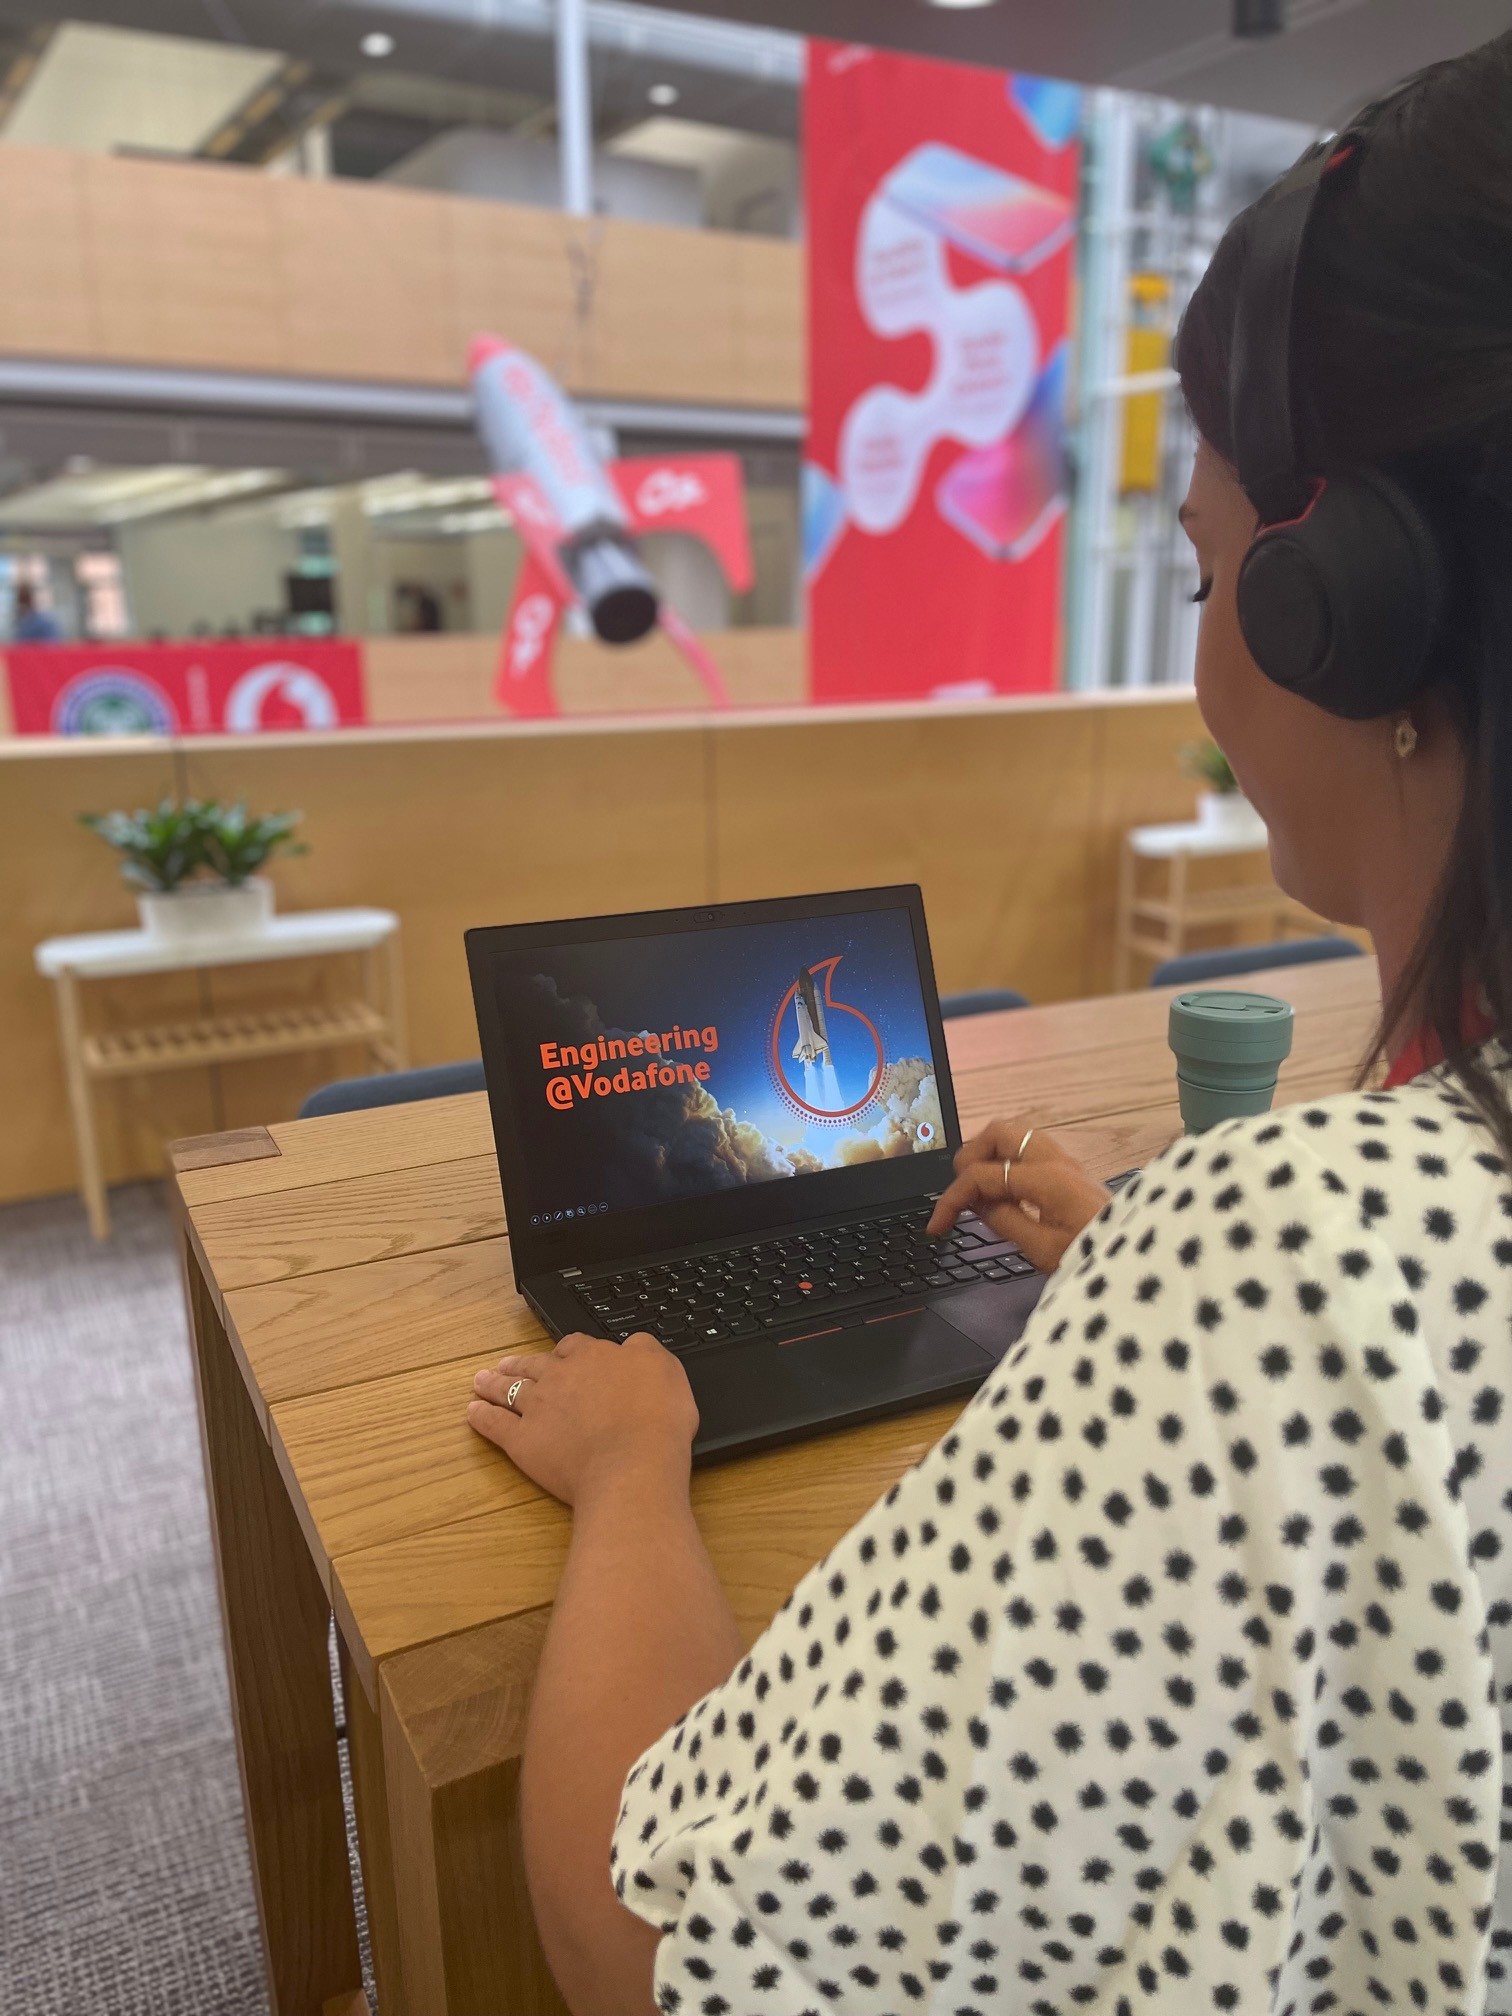 A woman looking at a laptop reading 'Engineering at Vodafone' in the office